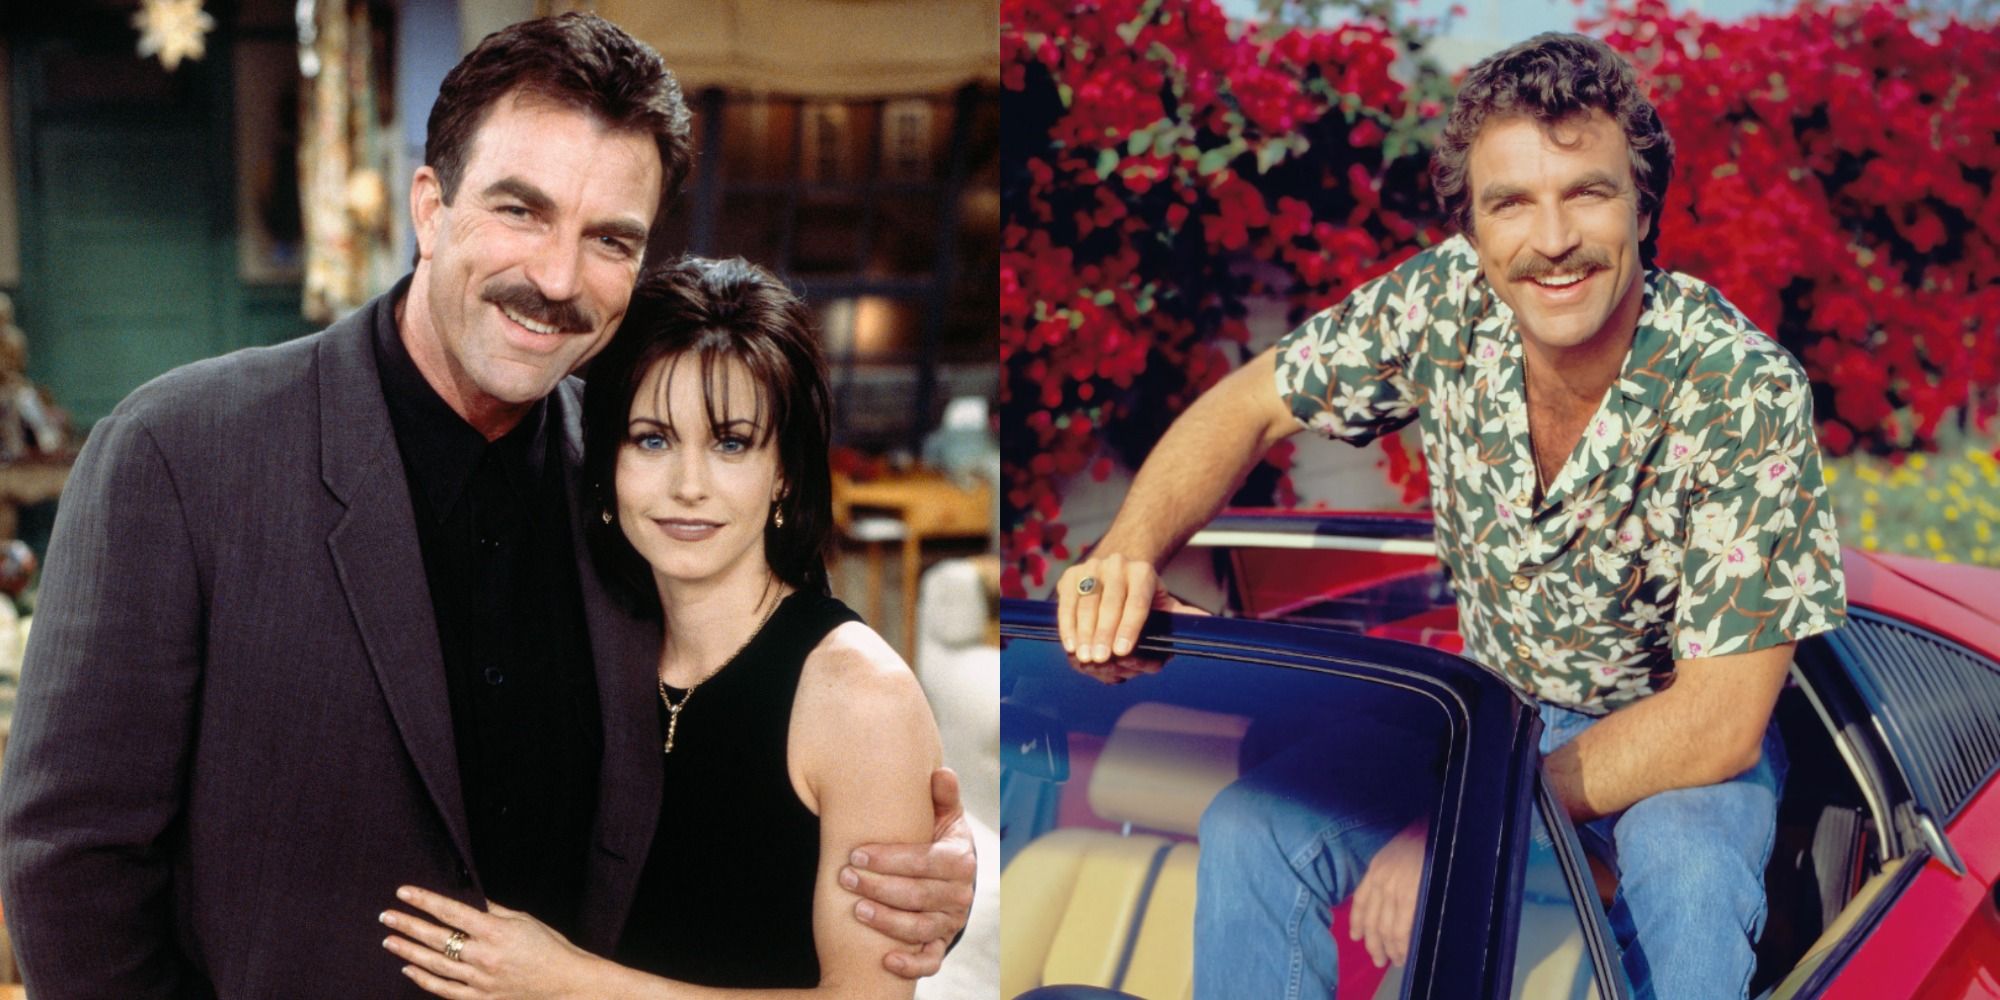 Tom Selleck in Friends and Magnum P.I.